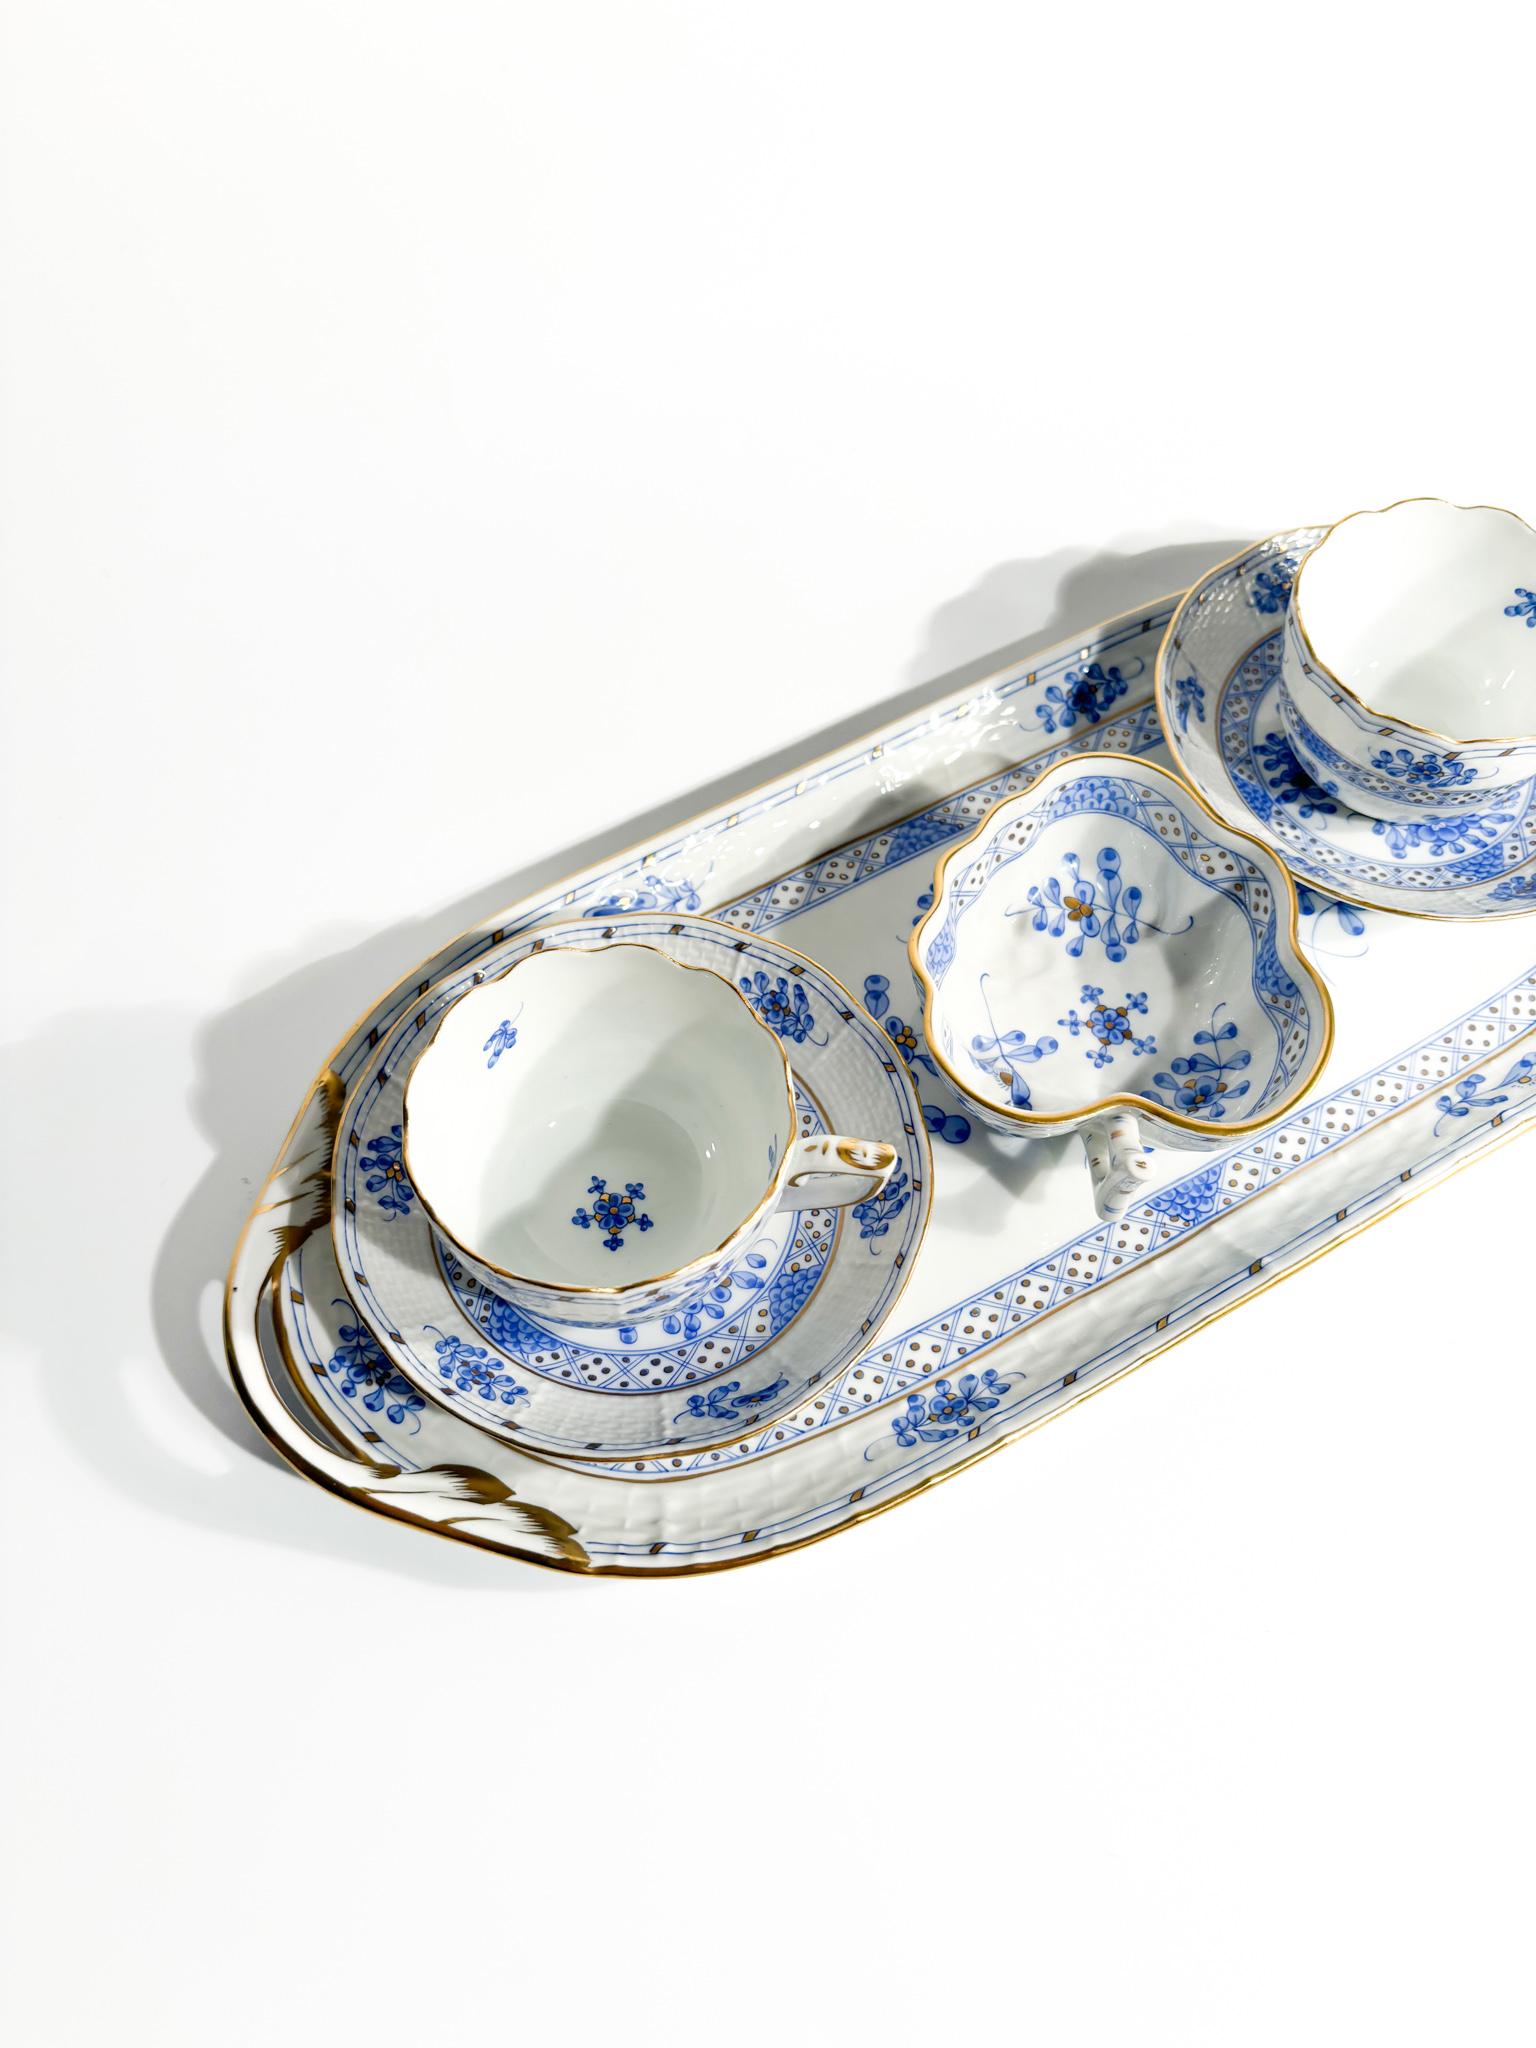 Herend Waldstein Porcelain Tete a Tete Service from the 1950s For Sale 4